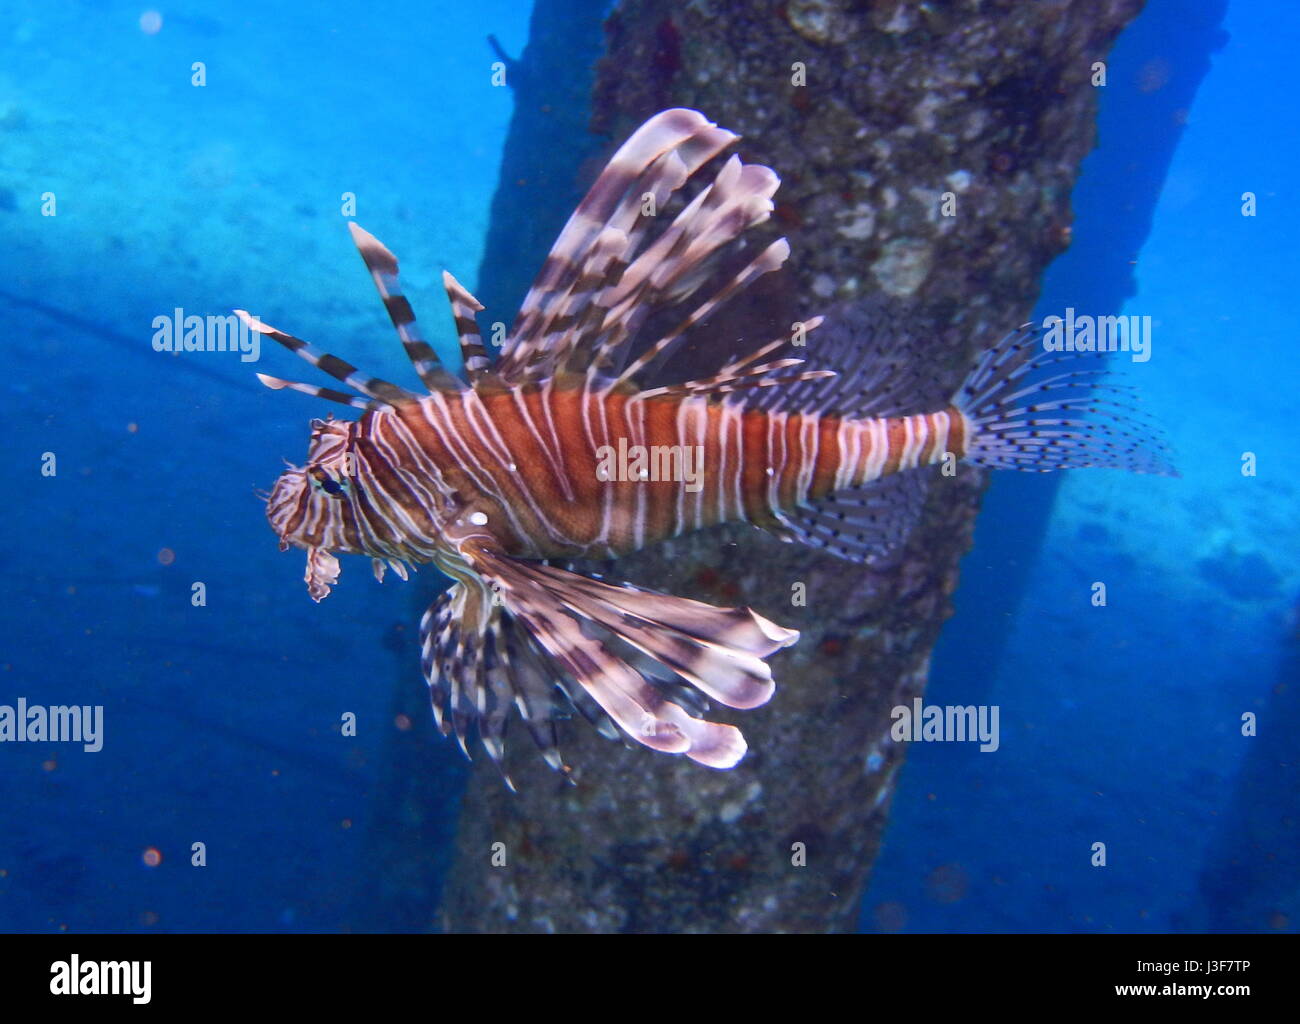 The most colourful Lionfish in the best coral reef ever seen. Coomon lionfish, Pterois miles, Aqaba, red Sea, Jordan, Middle East, Asia Stock Photo